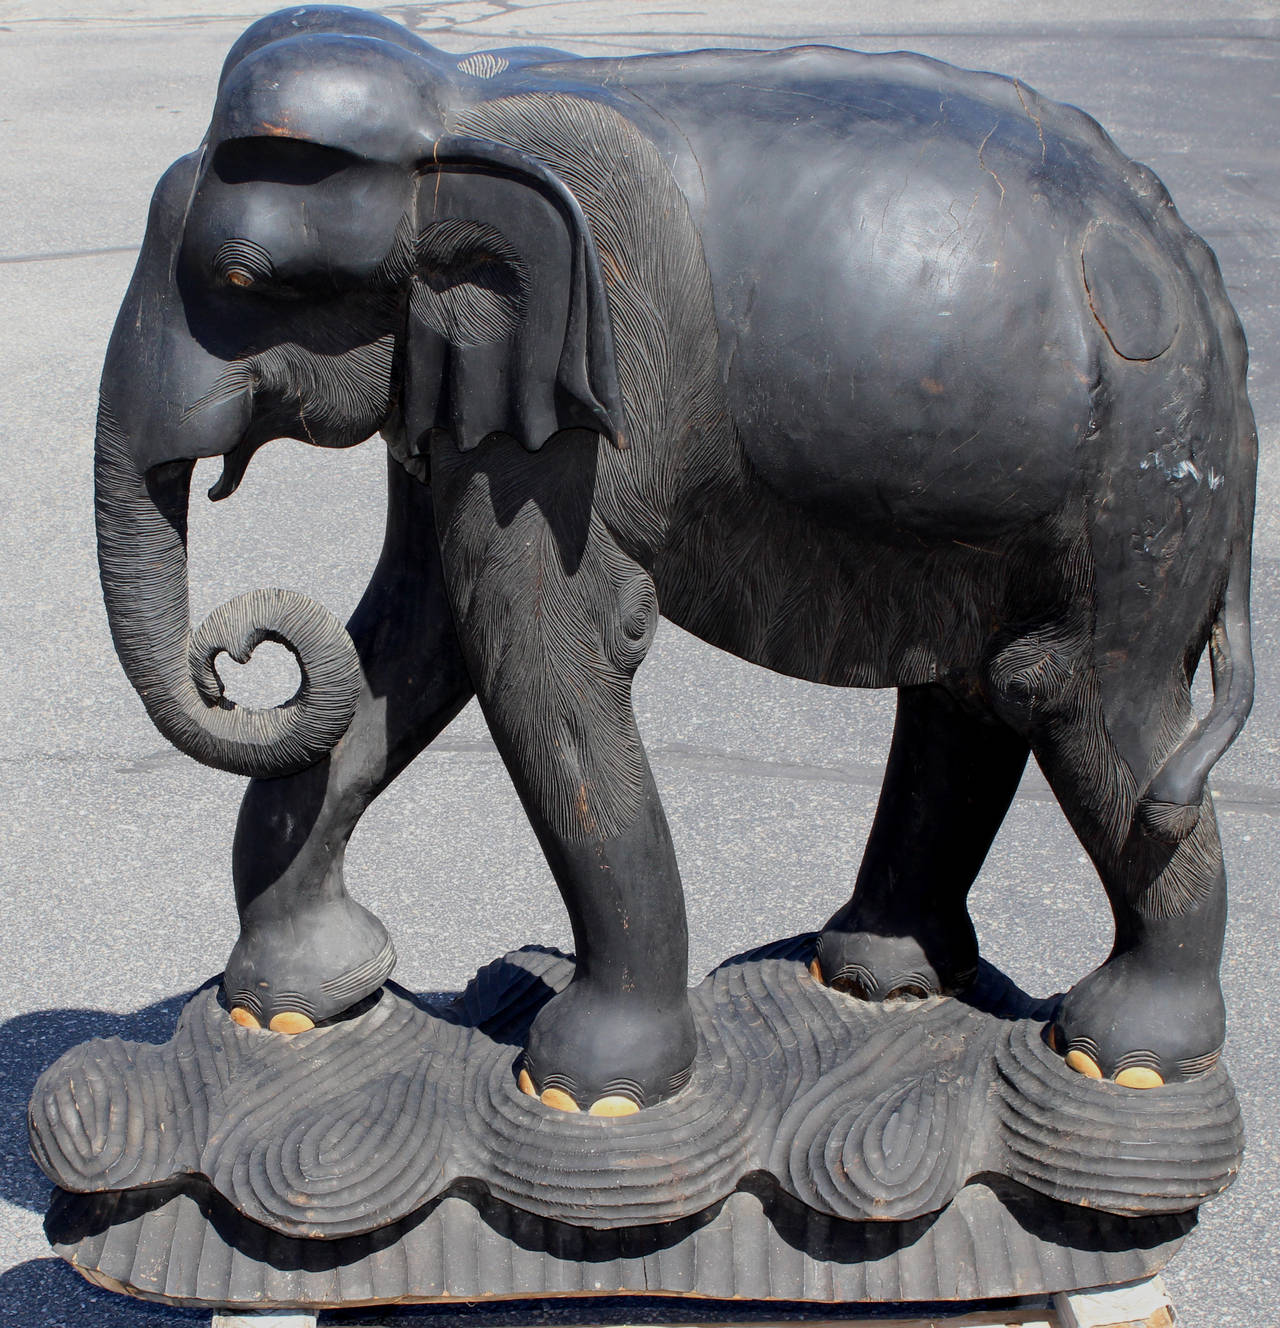 A large hardwood ebonized hand carved elephant, probably from India with inward curled trunk and nice detail. Some finish restorations and toe losses, as well as shrinkage cracks.  A circular patch added on its back, perhaps to replace a tree knot